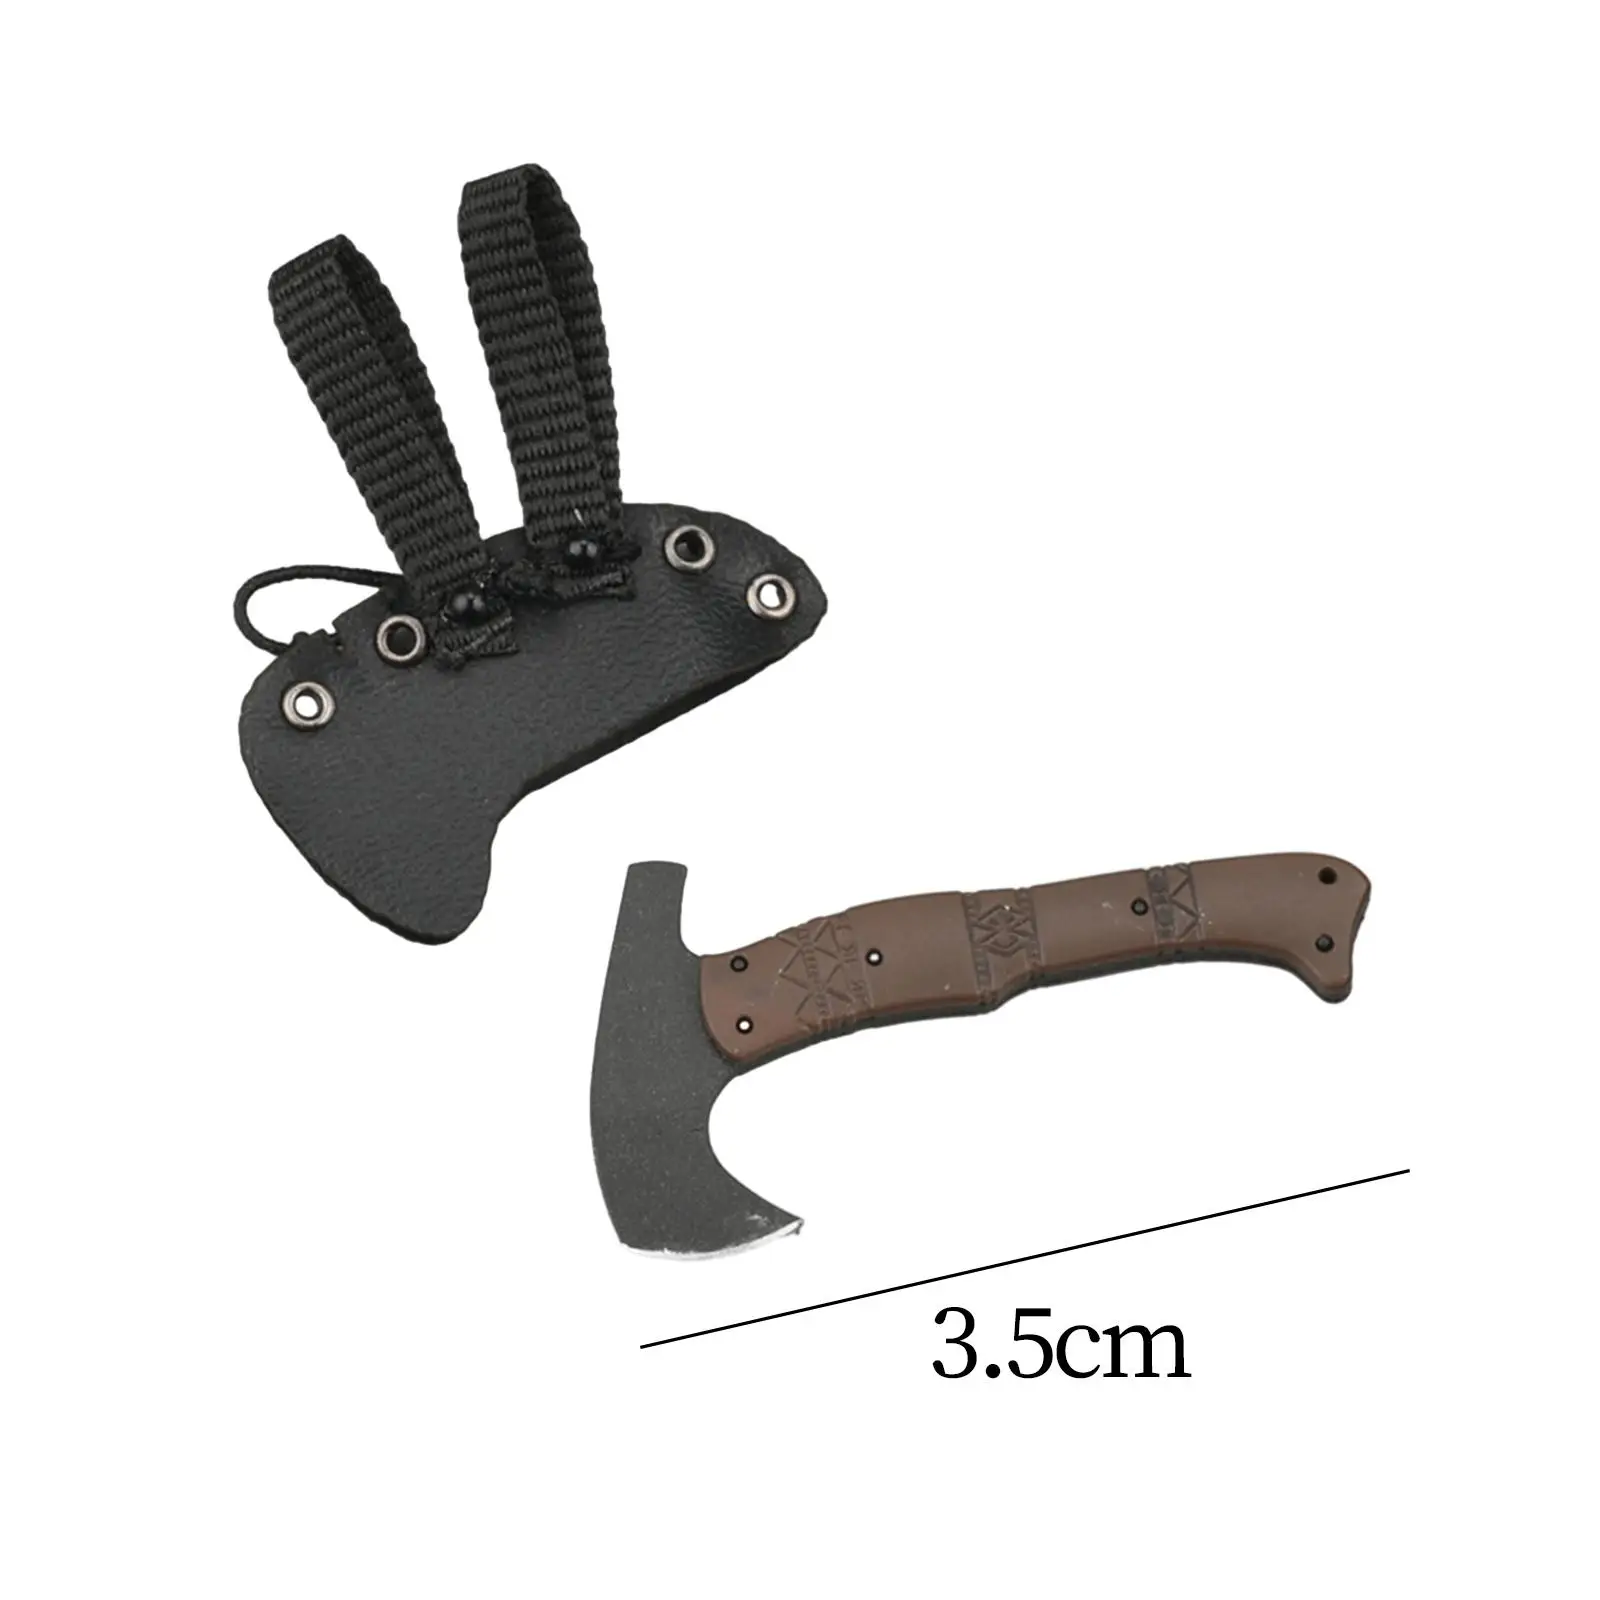 1:6 Hatchet Toy 1/6 Scale Axe Model Supplies Landscape Decor Mini Axe Miniature Ornament for Club Party Dining Room Presents